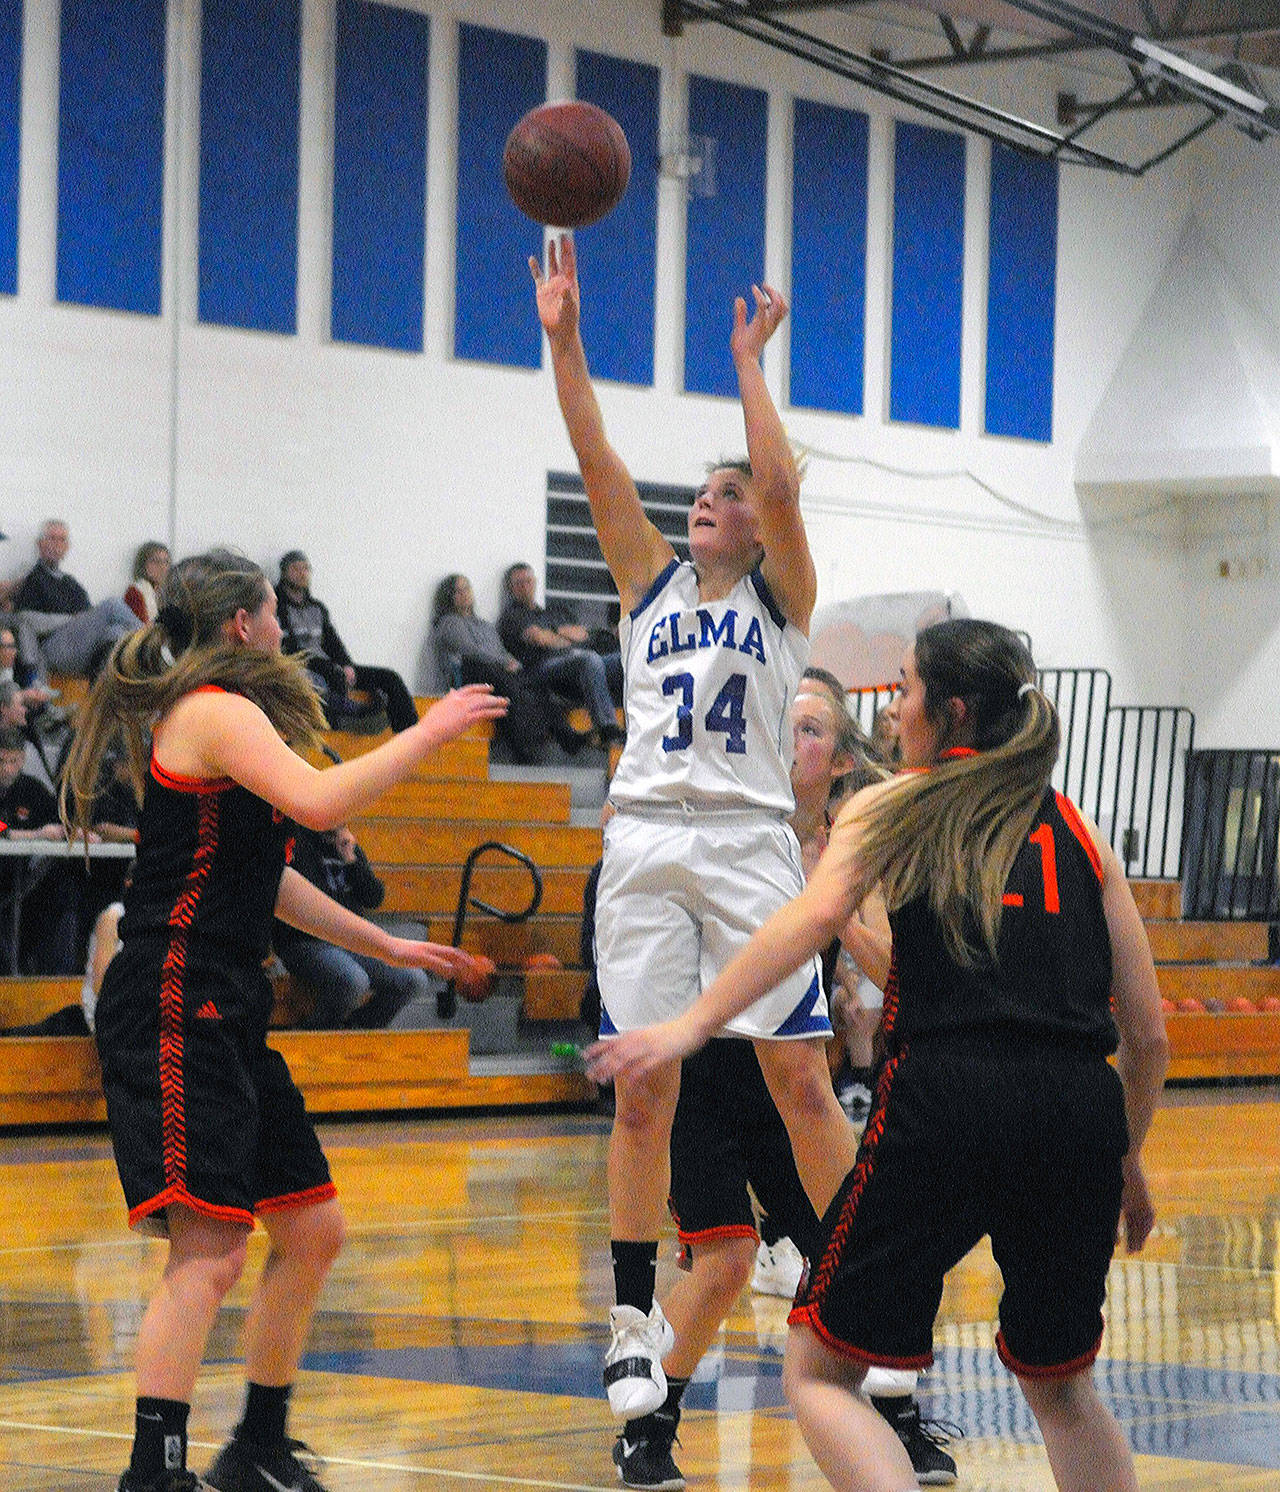 Elma’s Kali Rambo goes up for a mid-range jump shot in the first quarter against Centralia. Rambo had 12 points and six steals in the contest. (Hasani Grayson | Grays Harbor News Group)